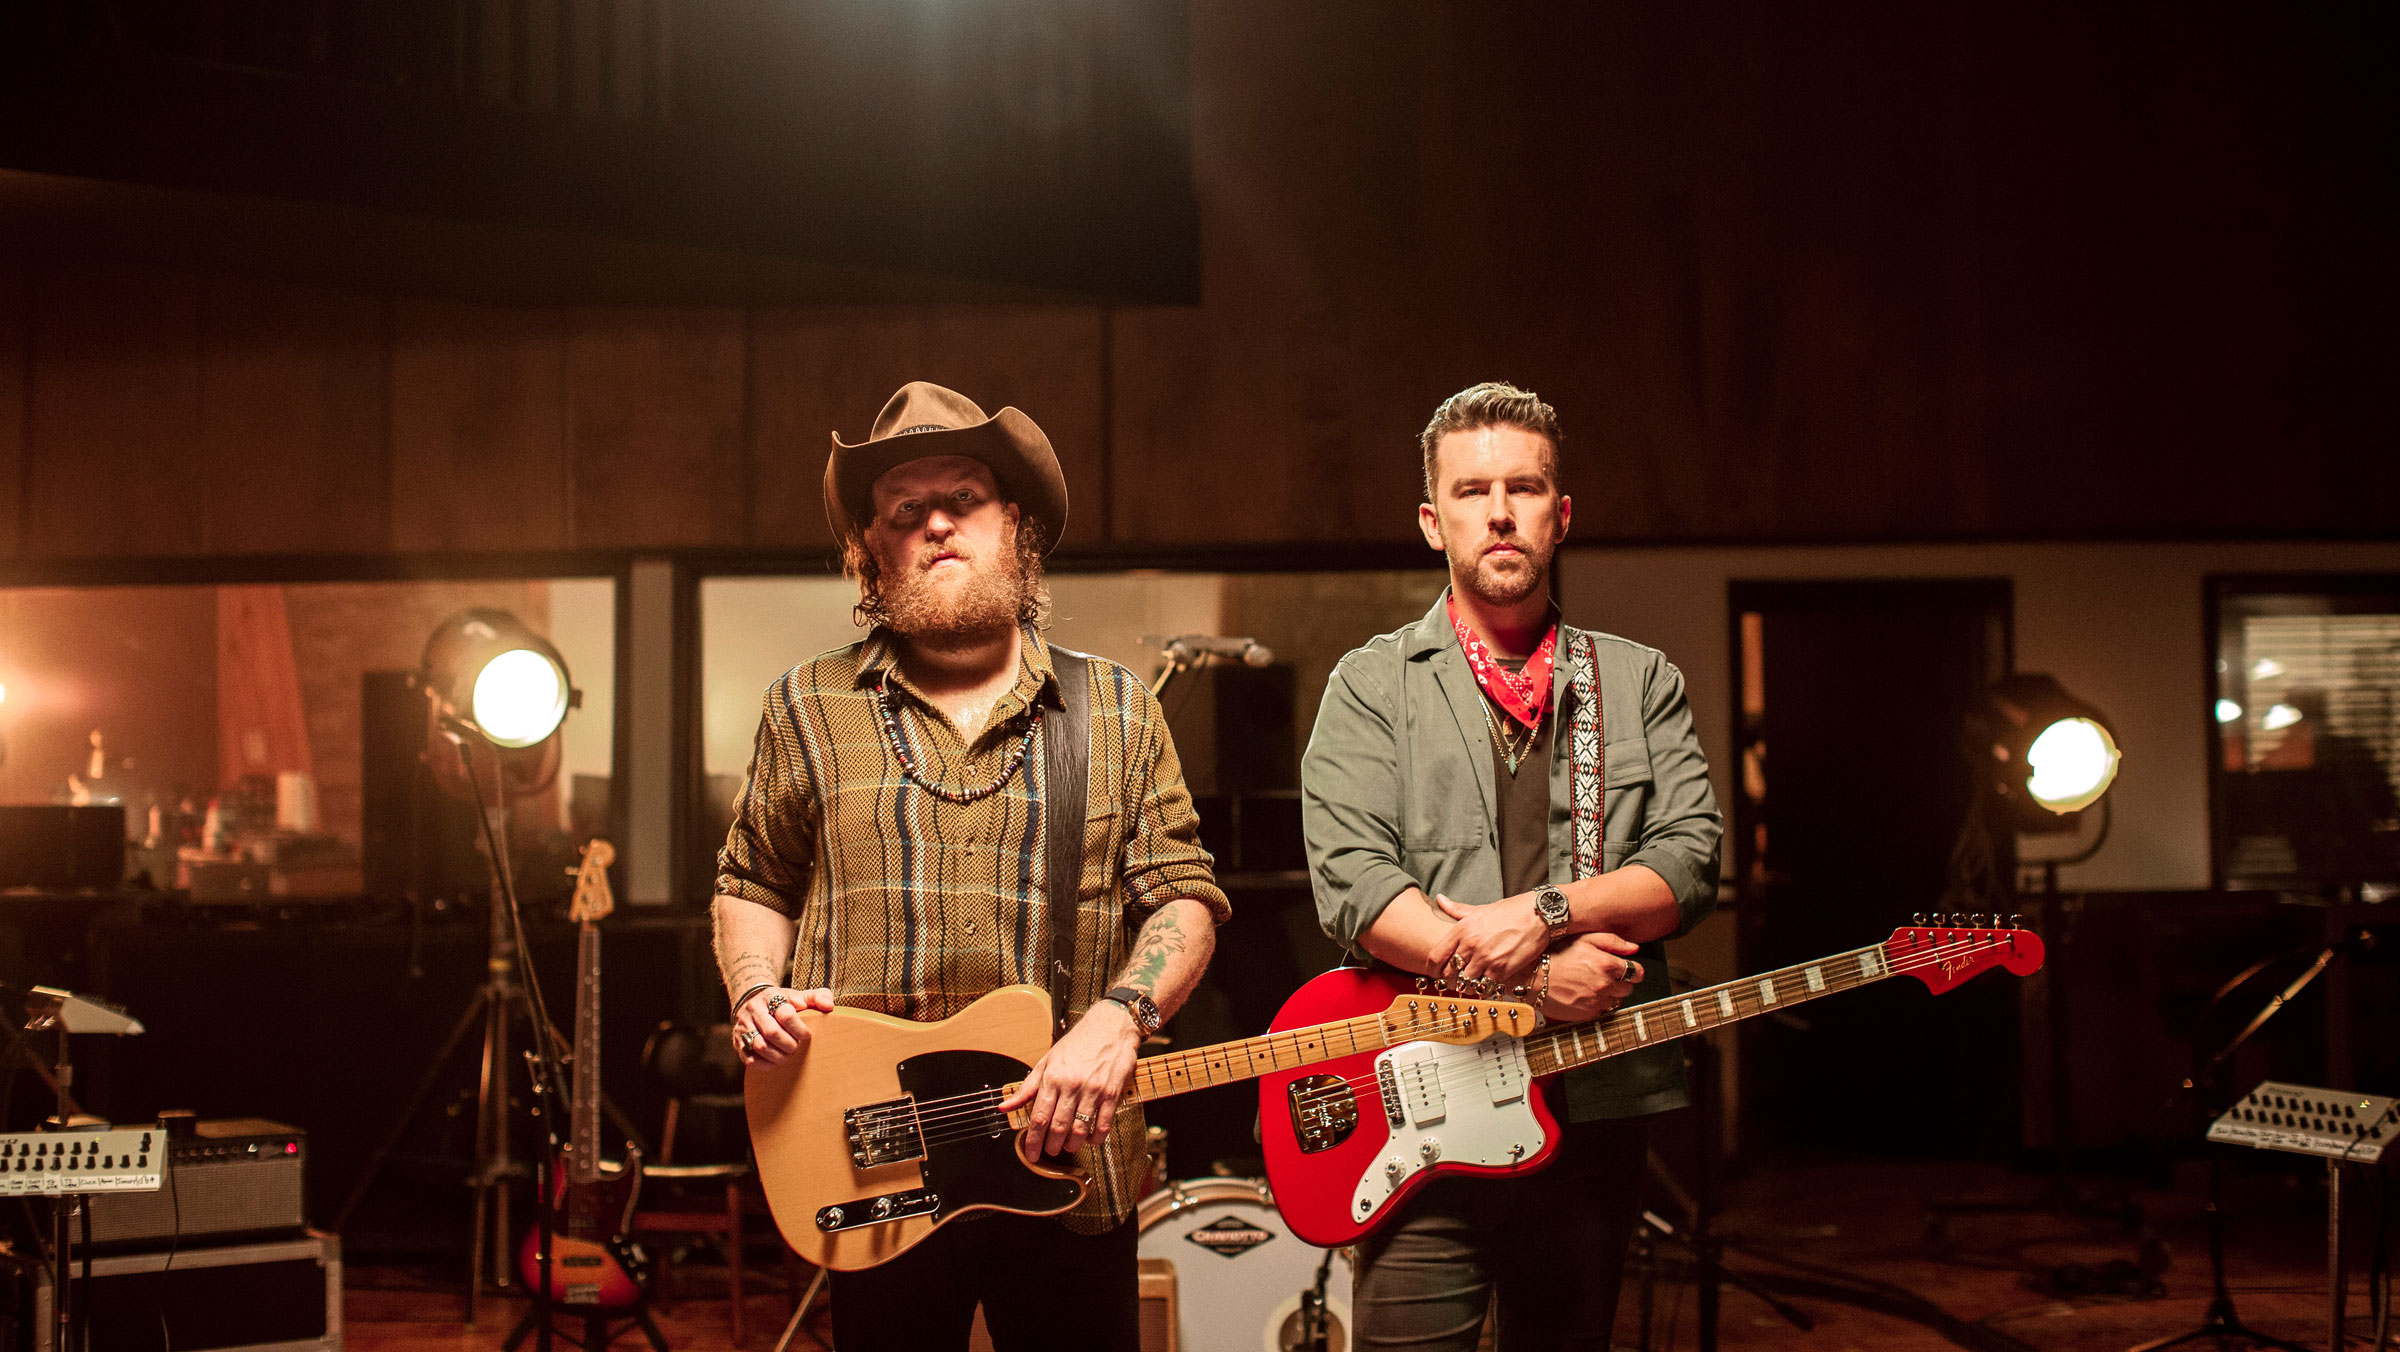 Fender has teamed up with boundary-breaking country music duo Brothers Osborne to bring the series to life.